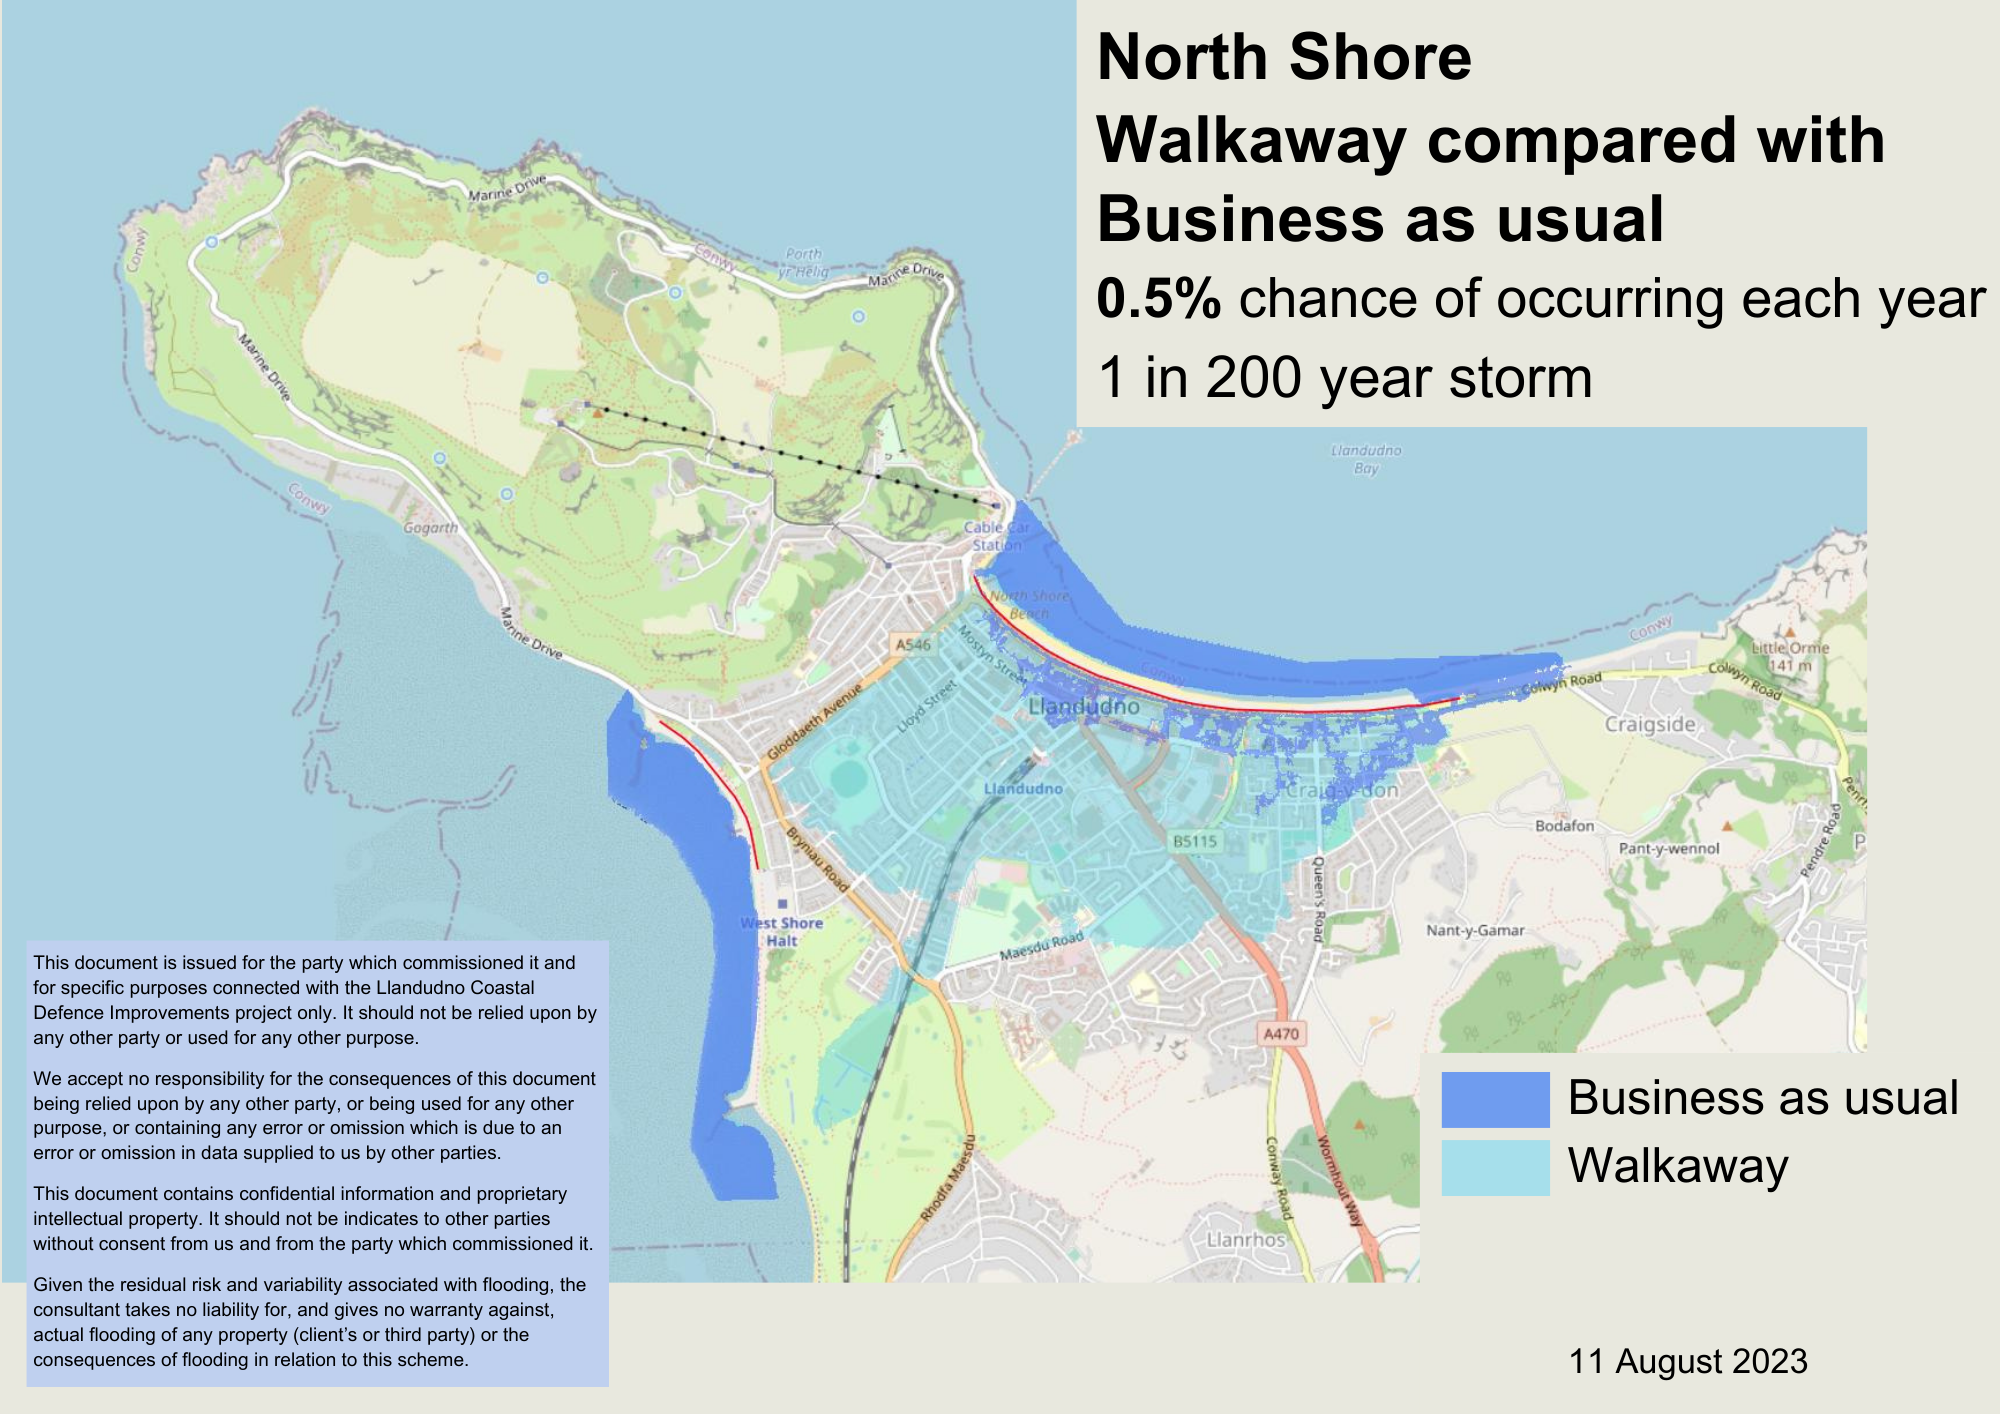 North Shore - Walkaway compared with business as usual in the 0.5% chance of flooding each year (1 in 200 years) scenario